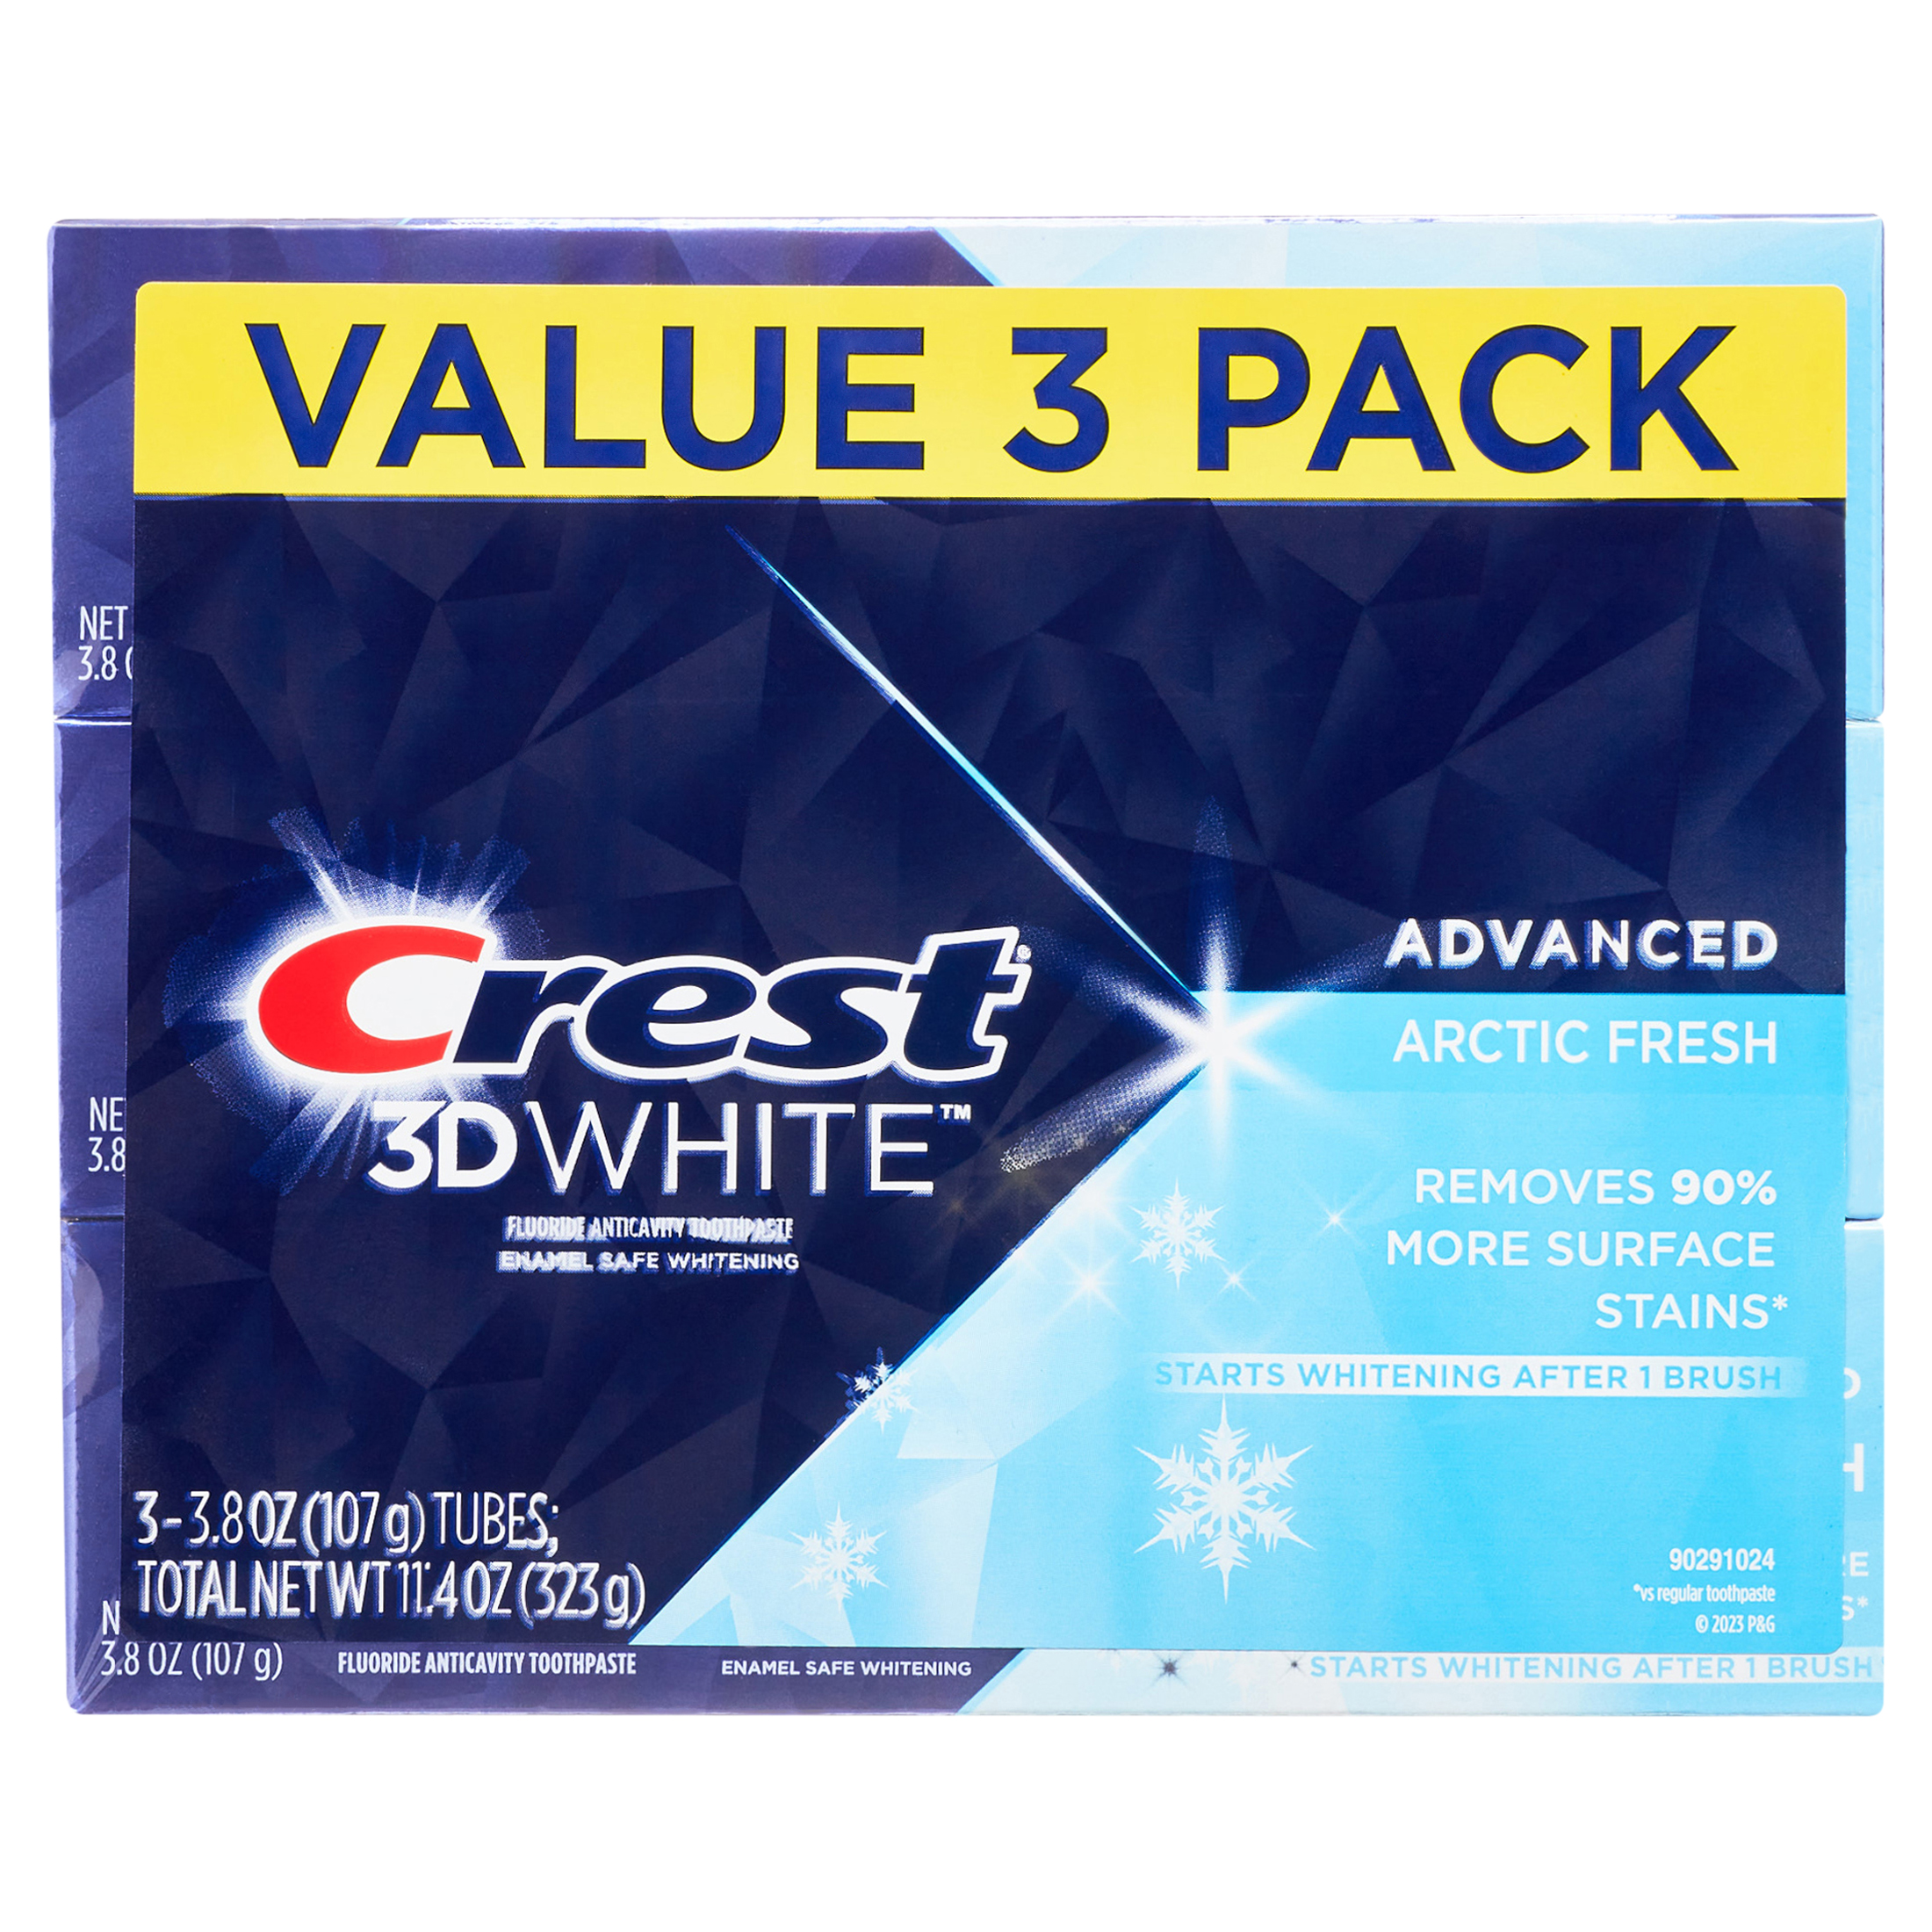 Crest 3D White Arctic Fresh Teeth Whitening Toothpaste, 3.8 oz, 3 Pack - image 1 of 11